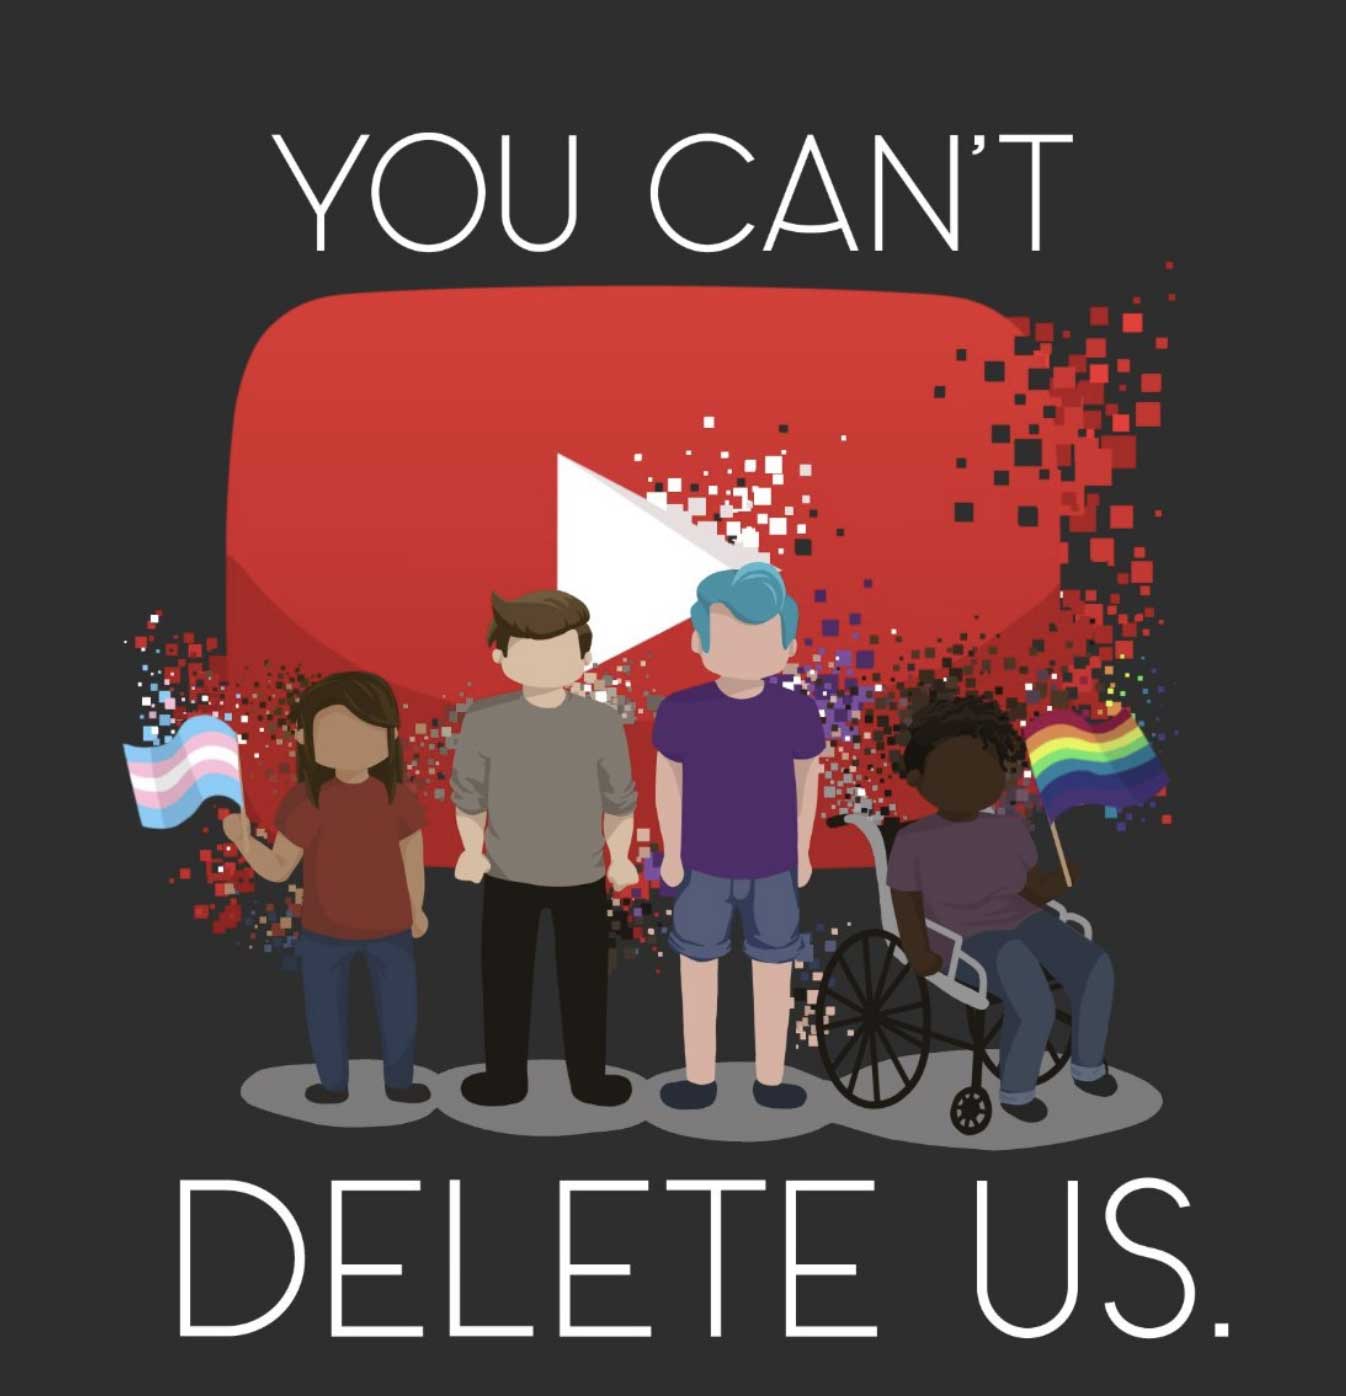 you can't delete us